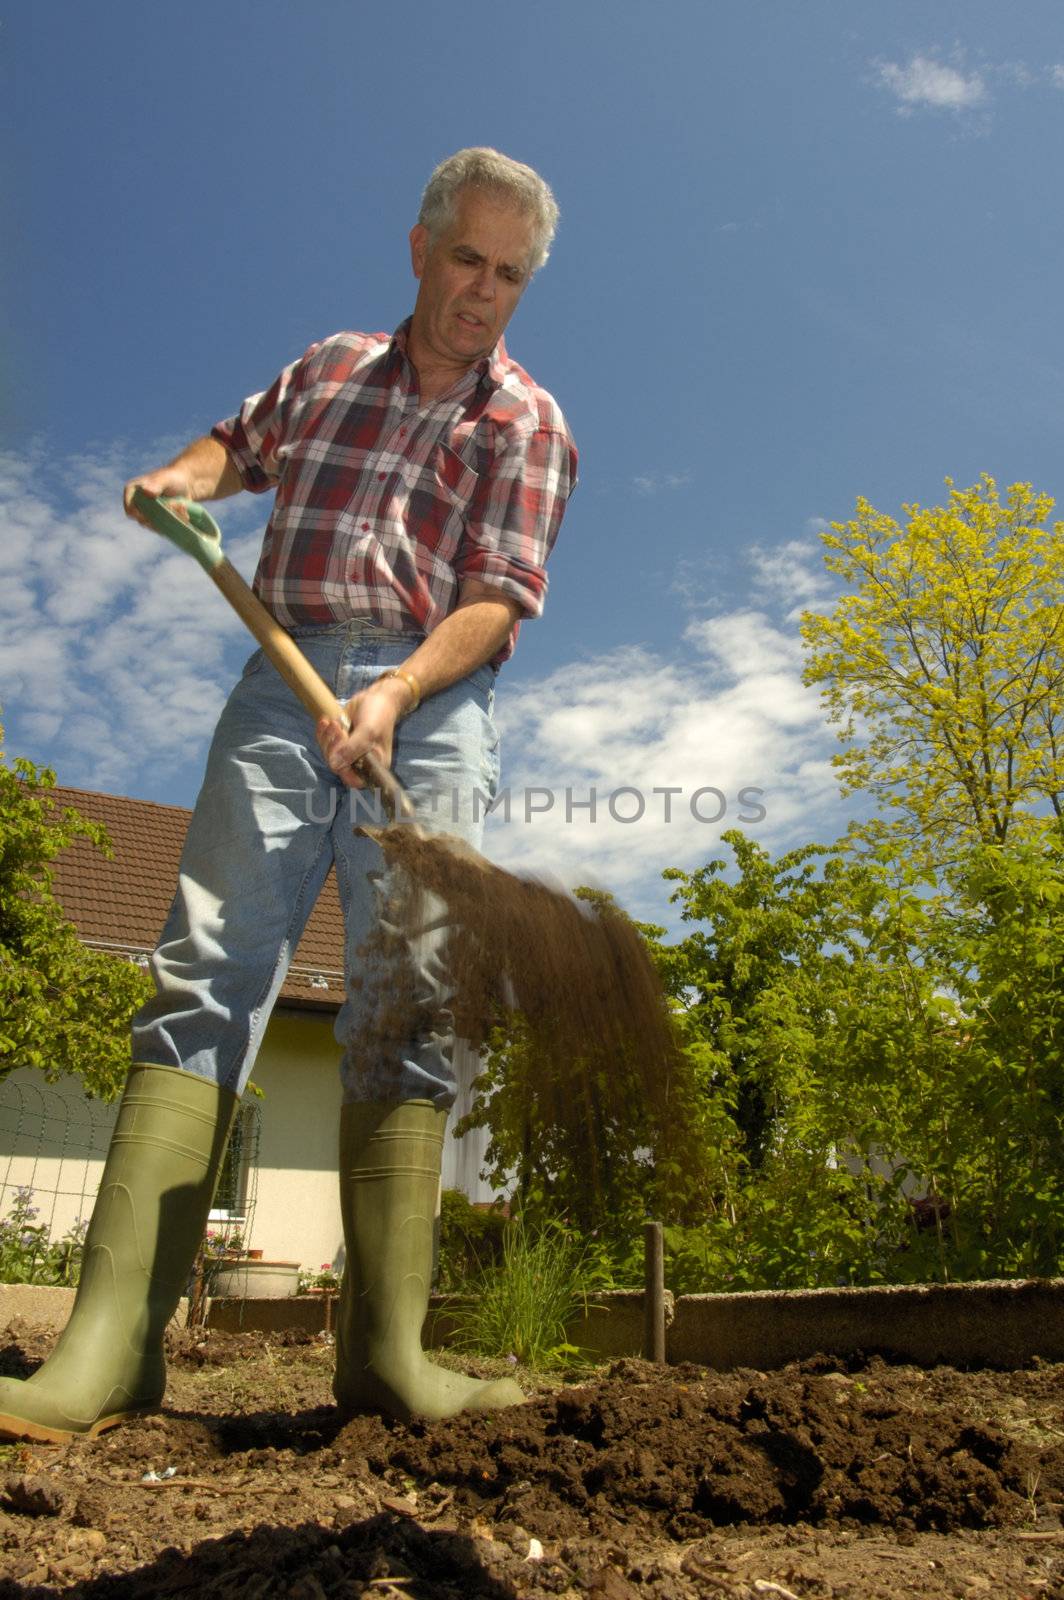 A man, turning over soil in the garden, taken from a low viewpoint. Motion blur on his hands and the soil as it falls off the spade.